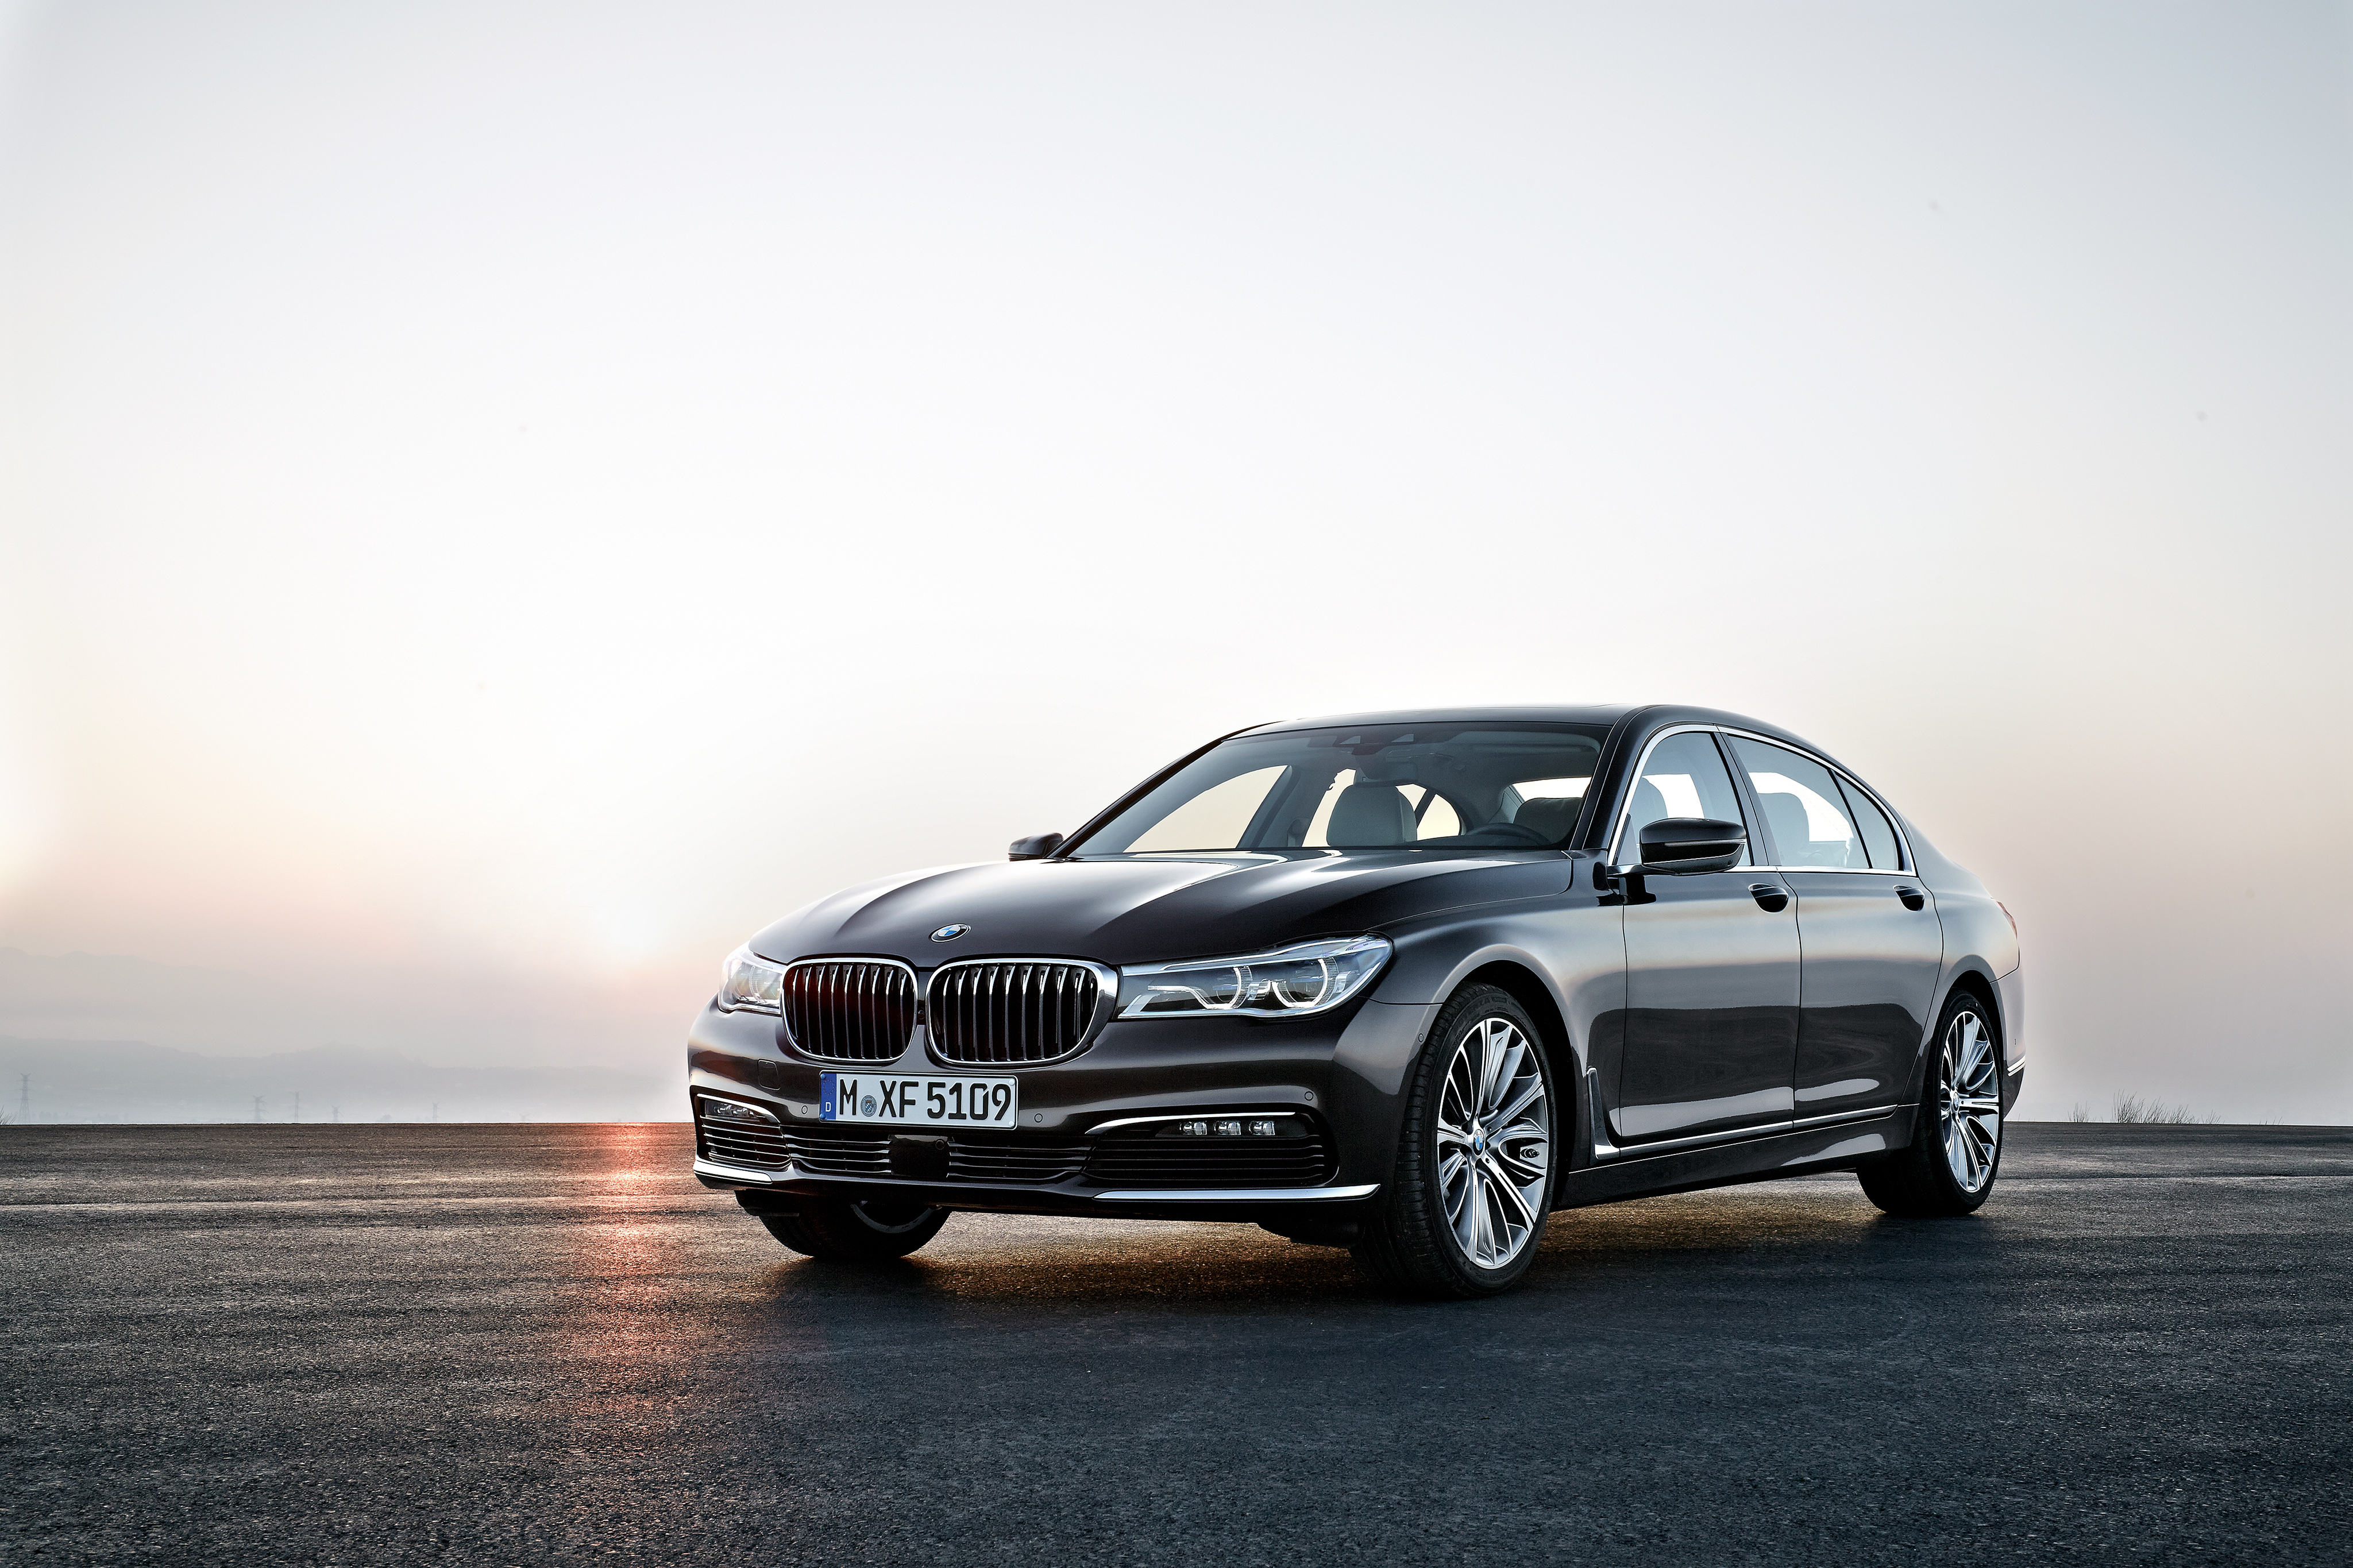 BMW 7 Series (G11) mod specifications